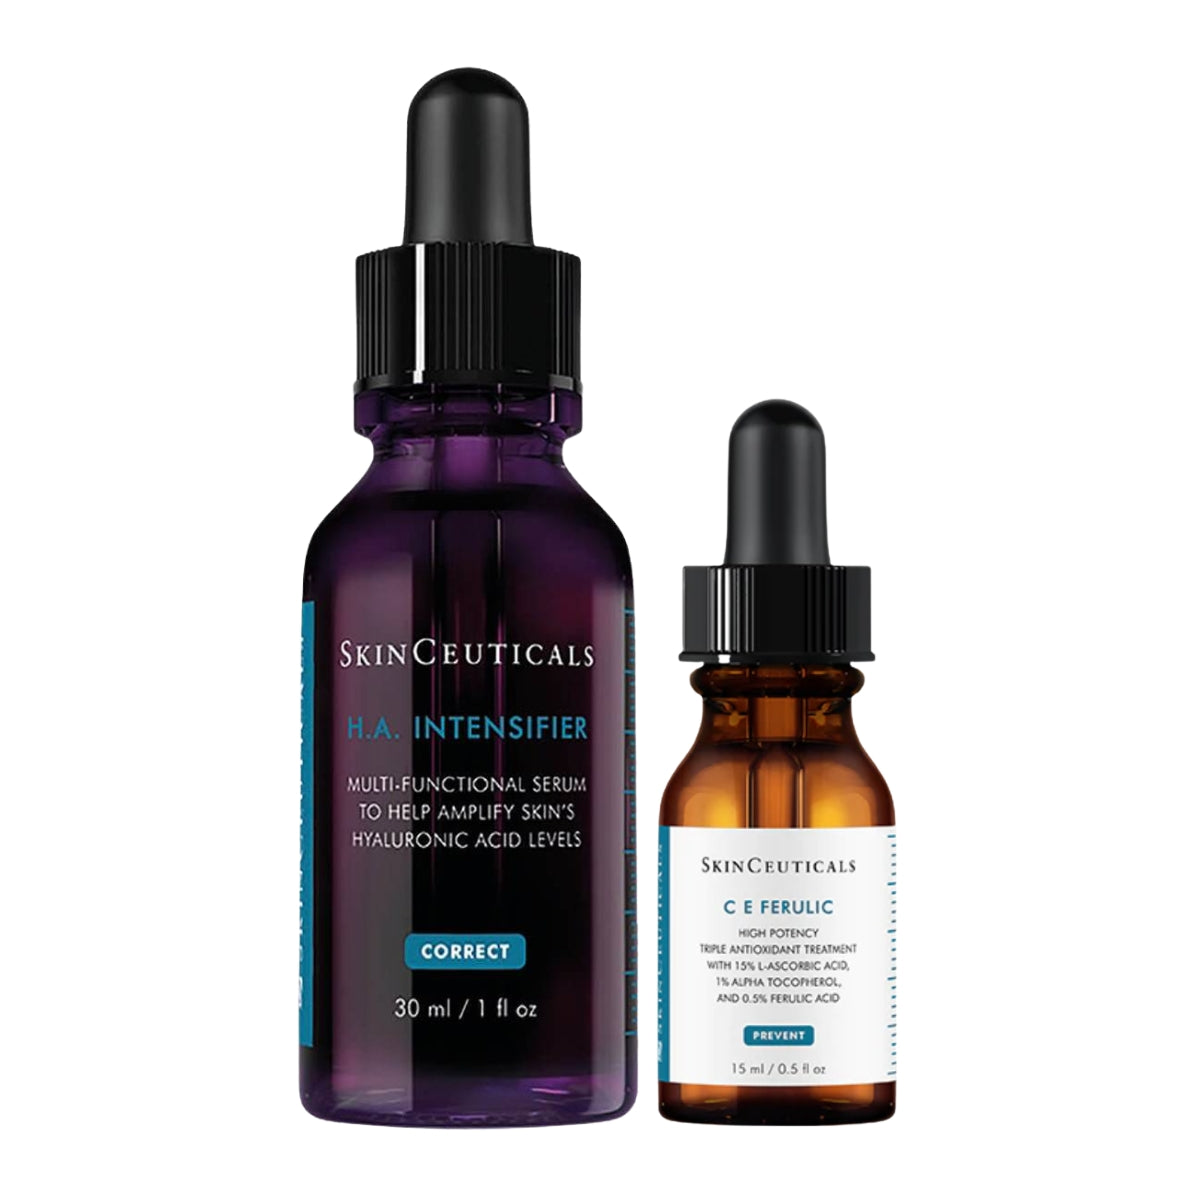 SkinCeuticals Hyaluronic Acid Intensifier & Free Choice of 15ml